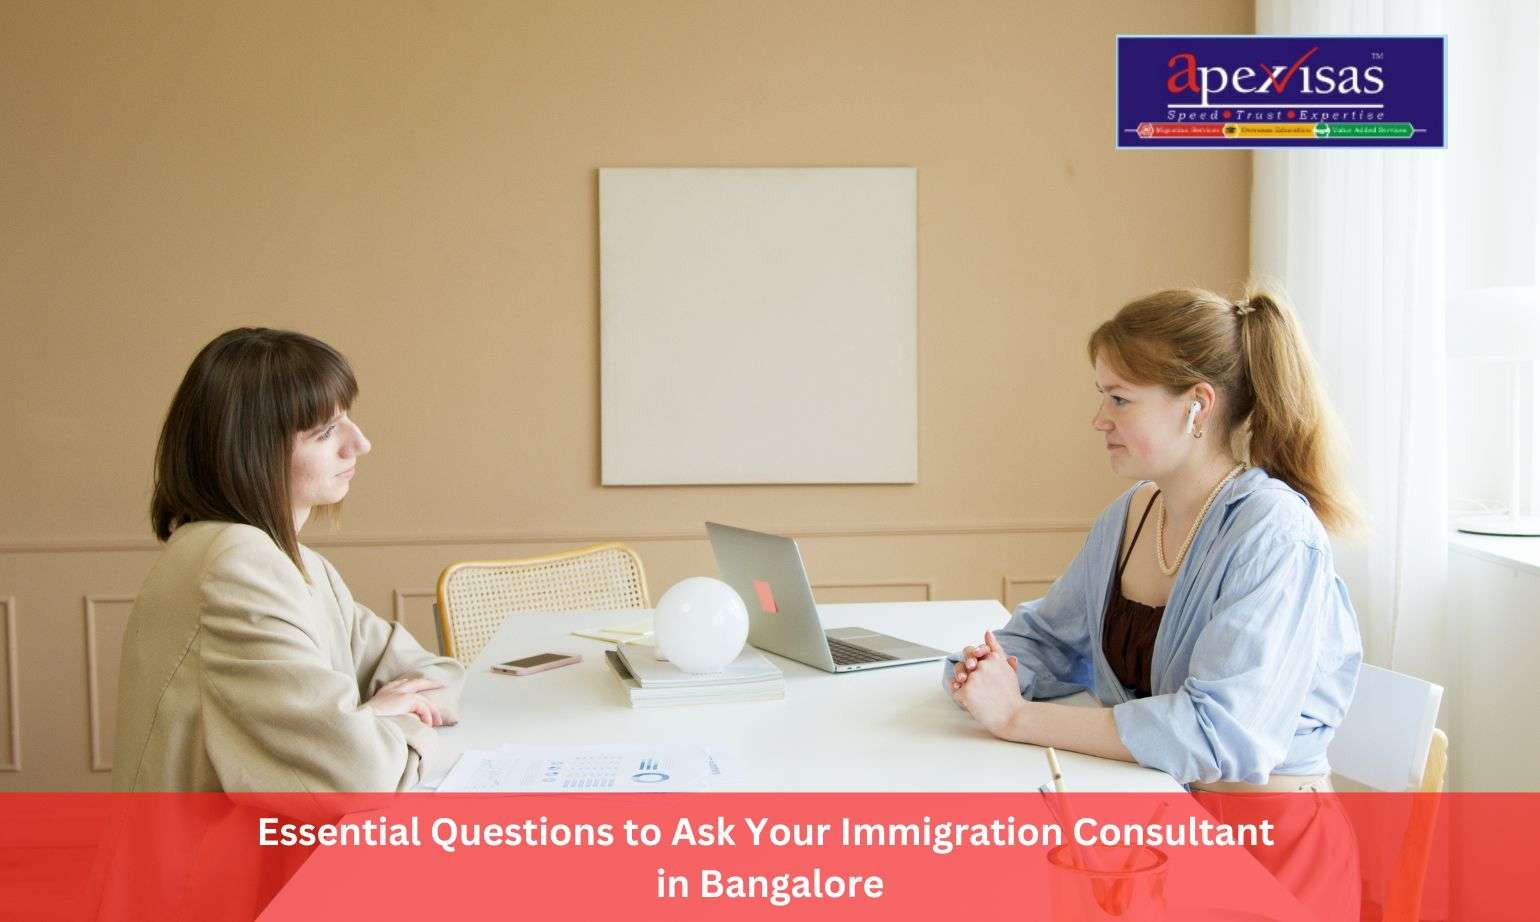 10 Essential Questions to Ask Your Immigration Consultant in Bangalore